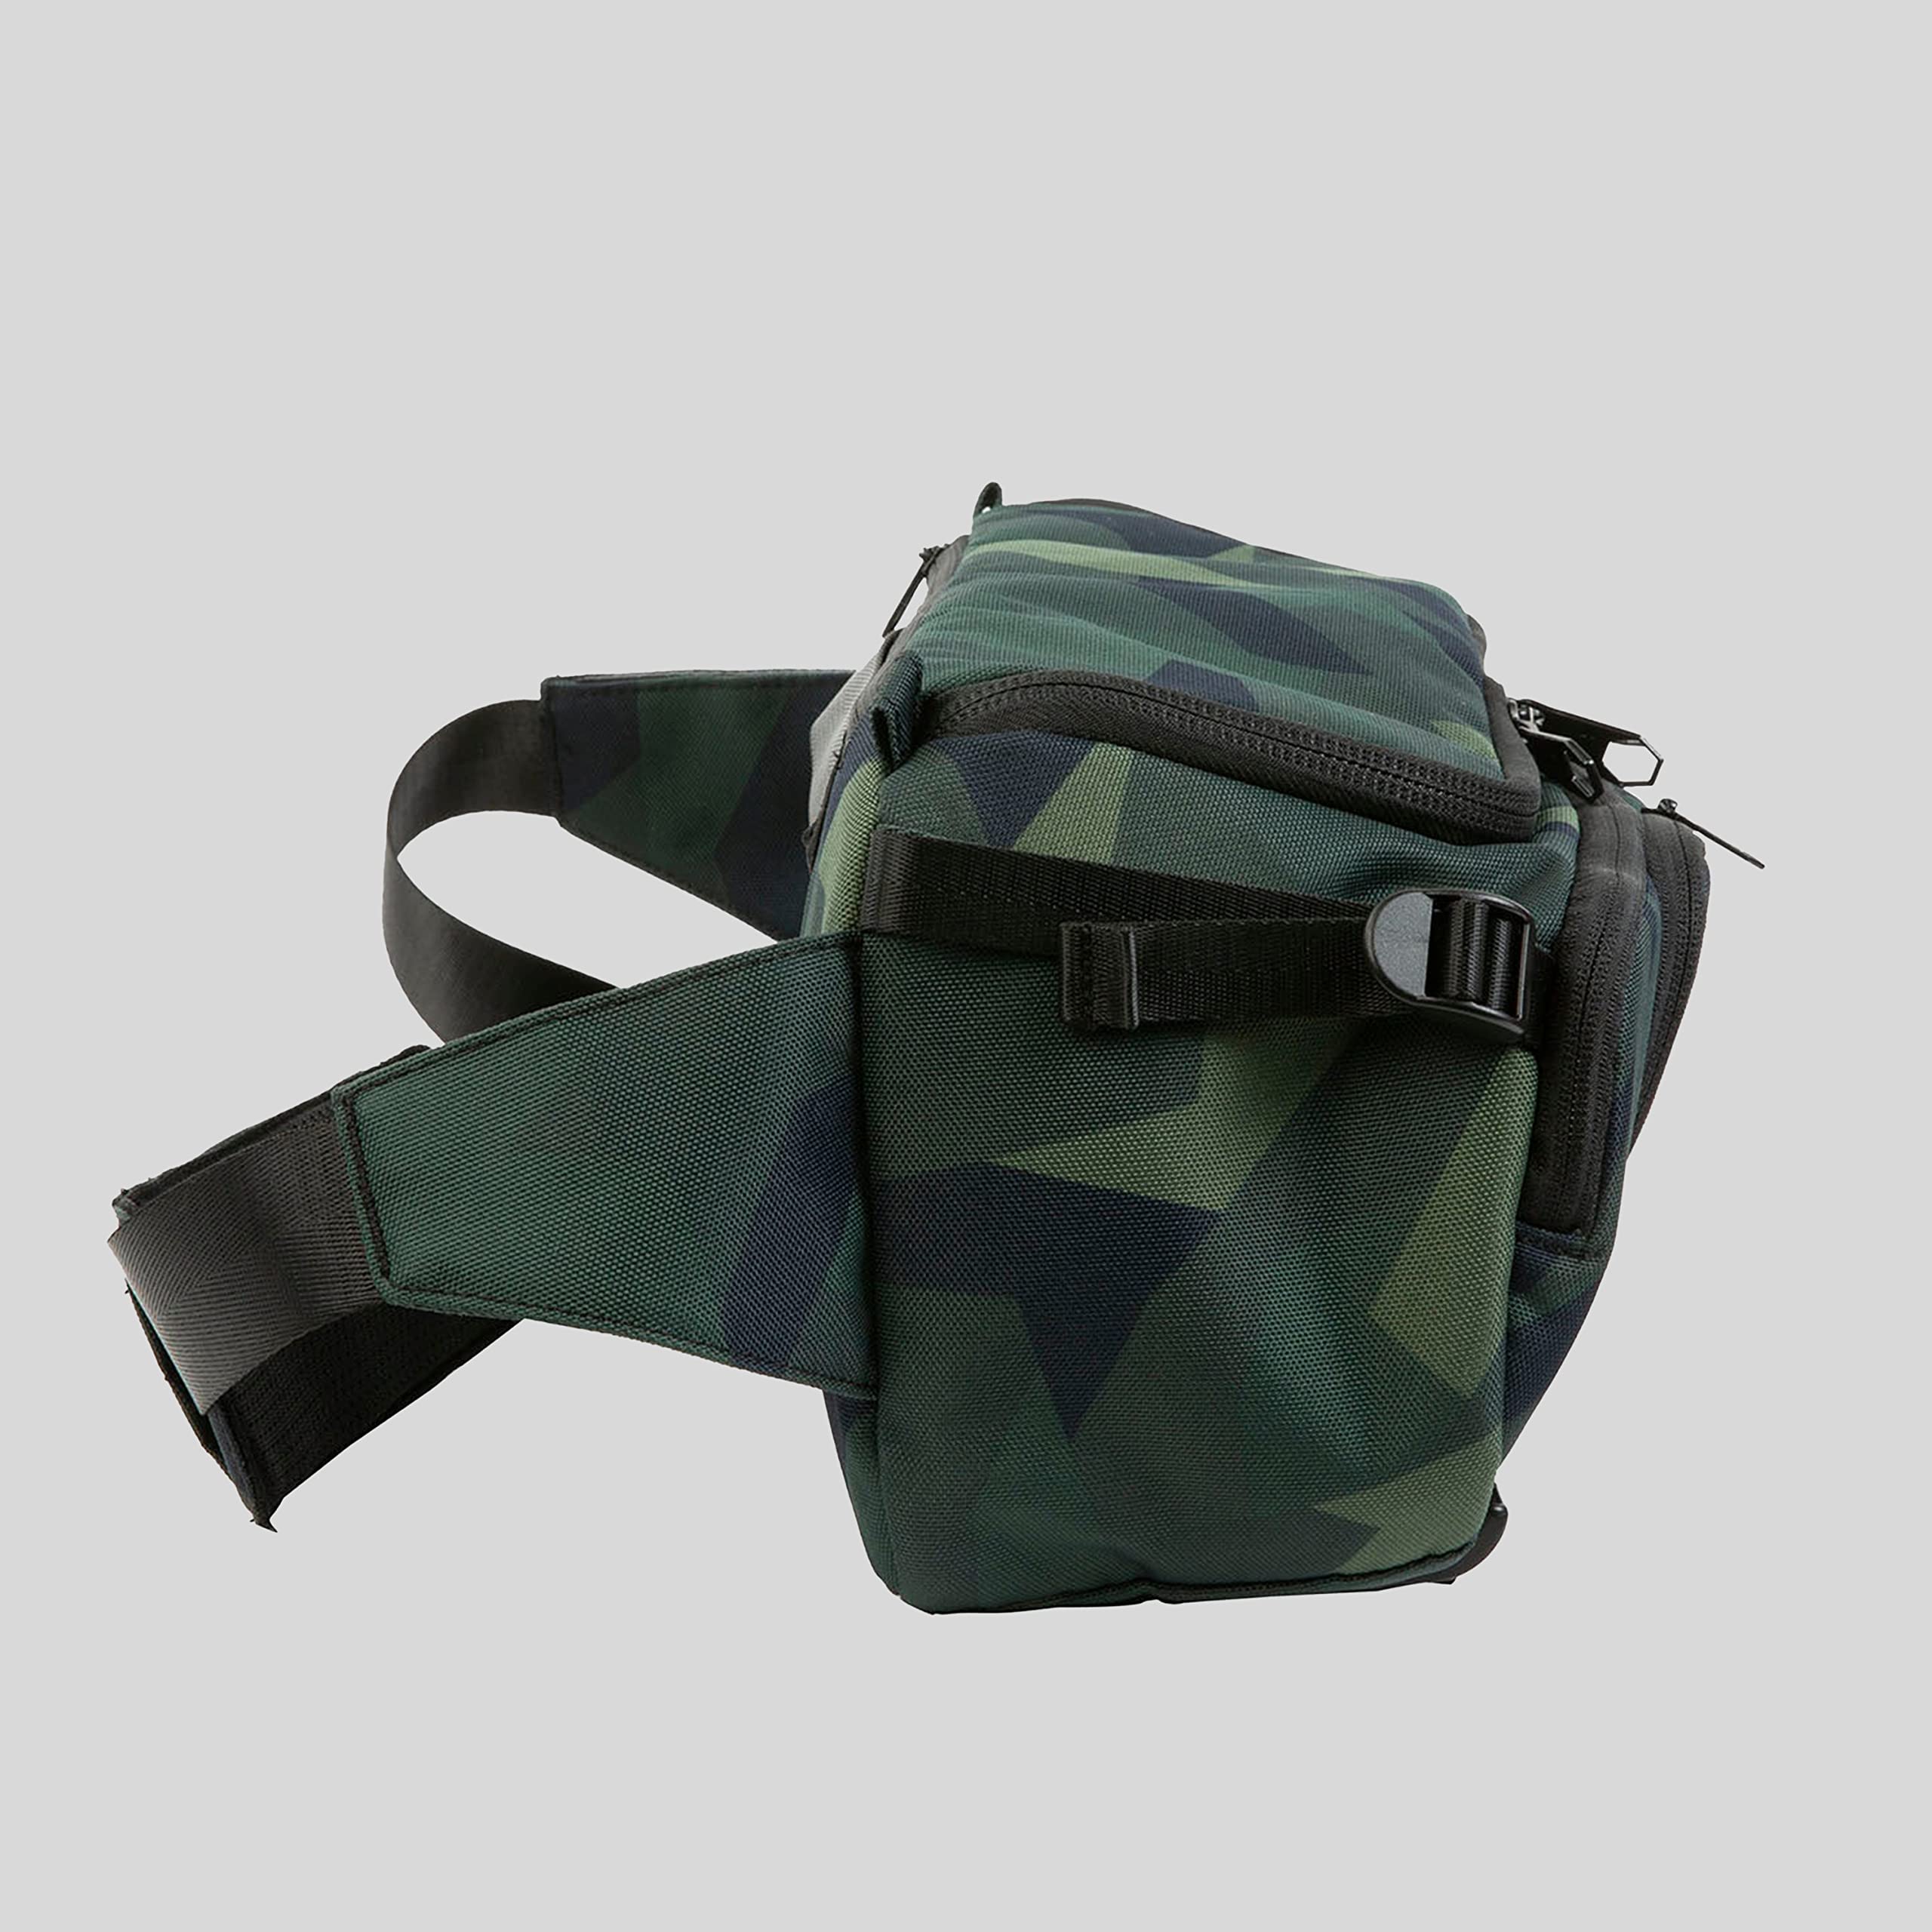 HEX Ranger DSLR Sling, with Adjustable Carry Straps, Collapsible Interior Dividers & More, Camo